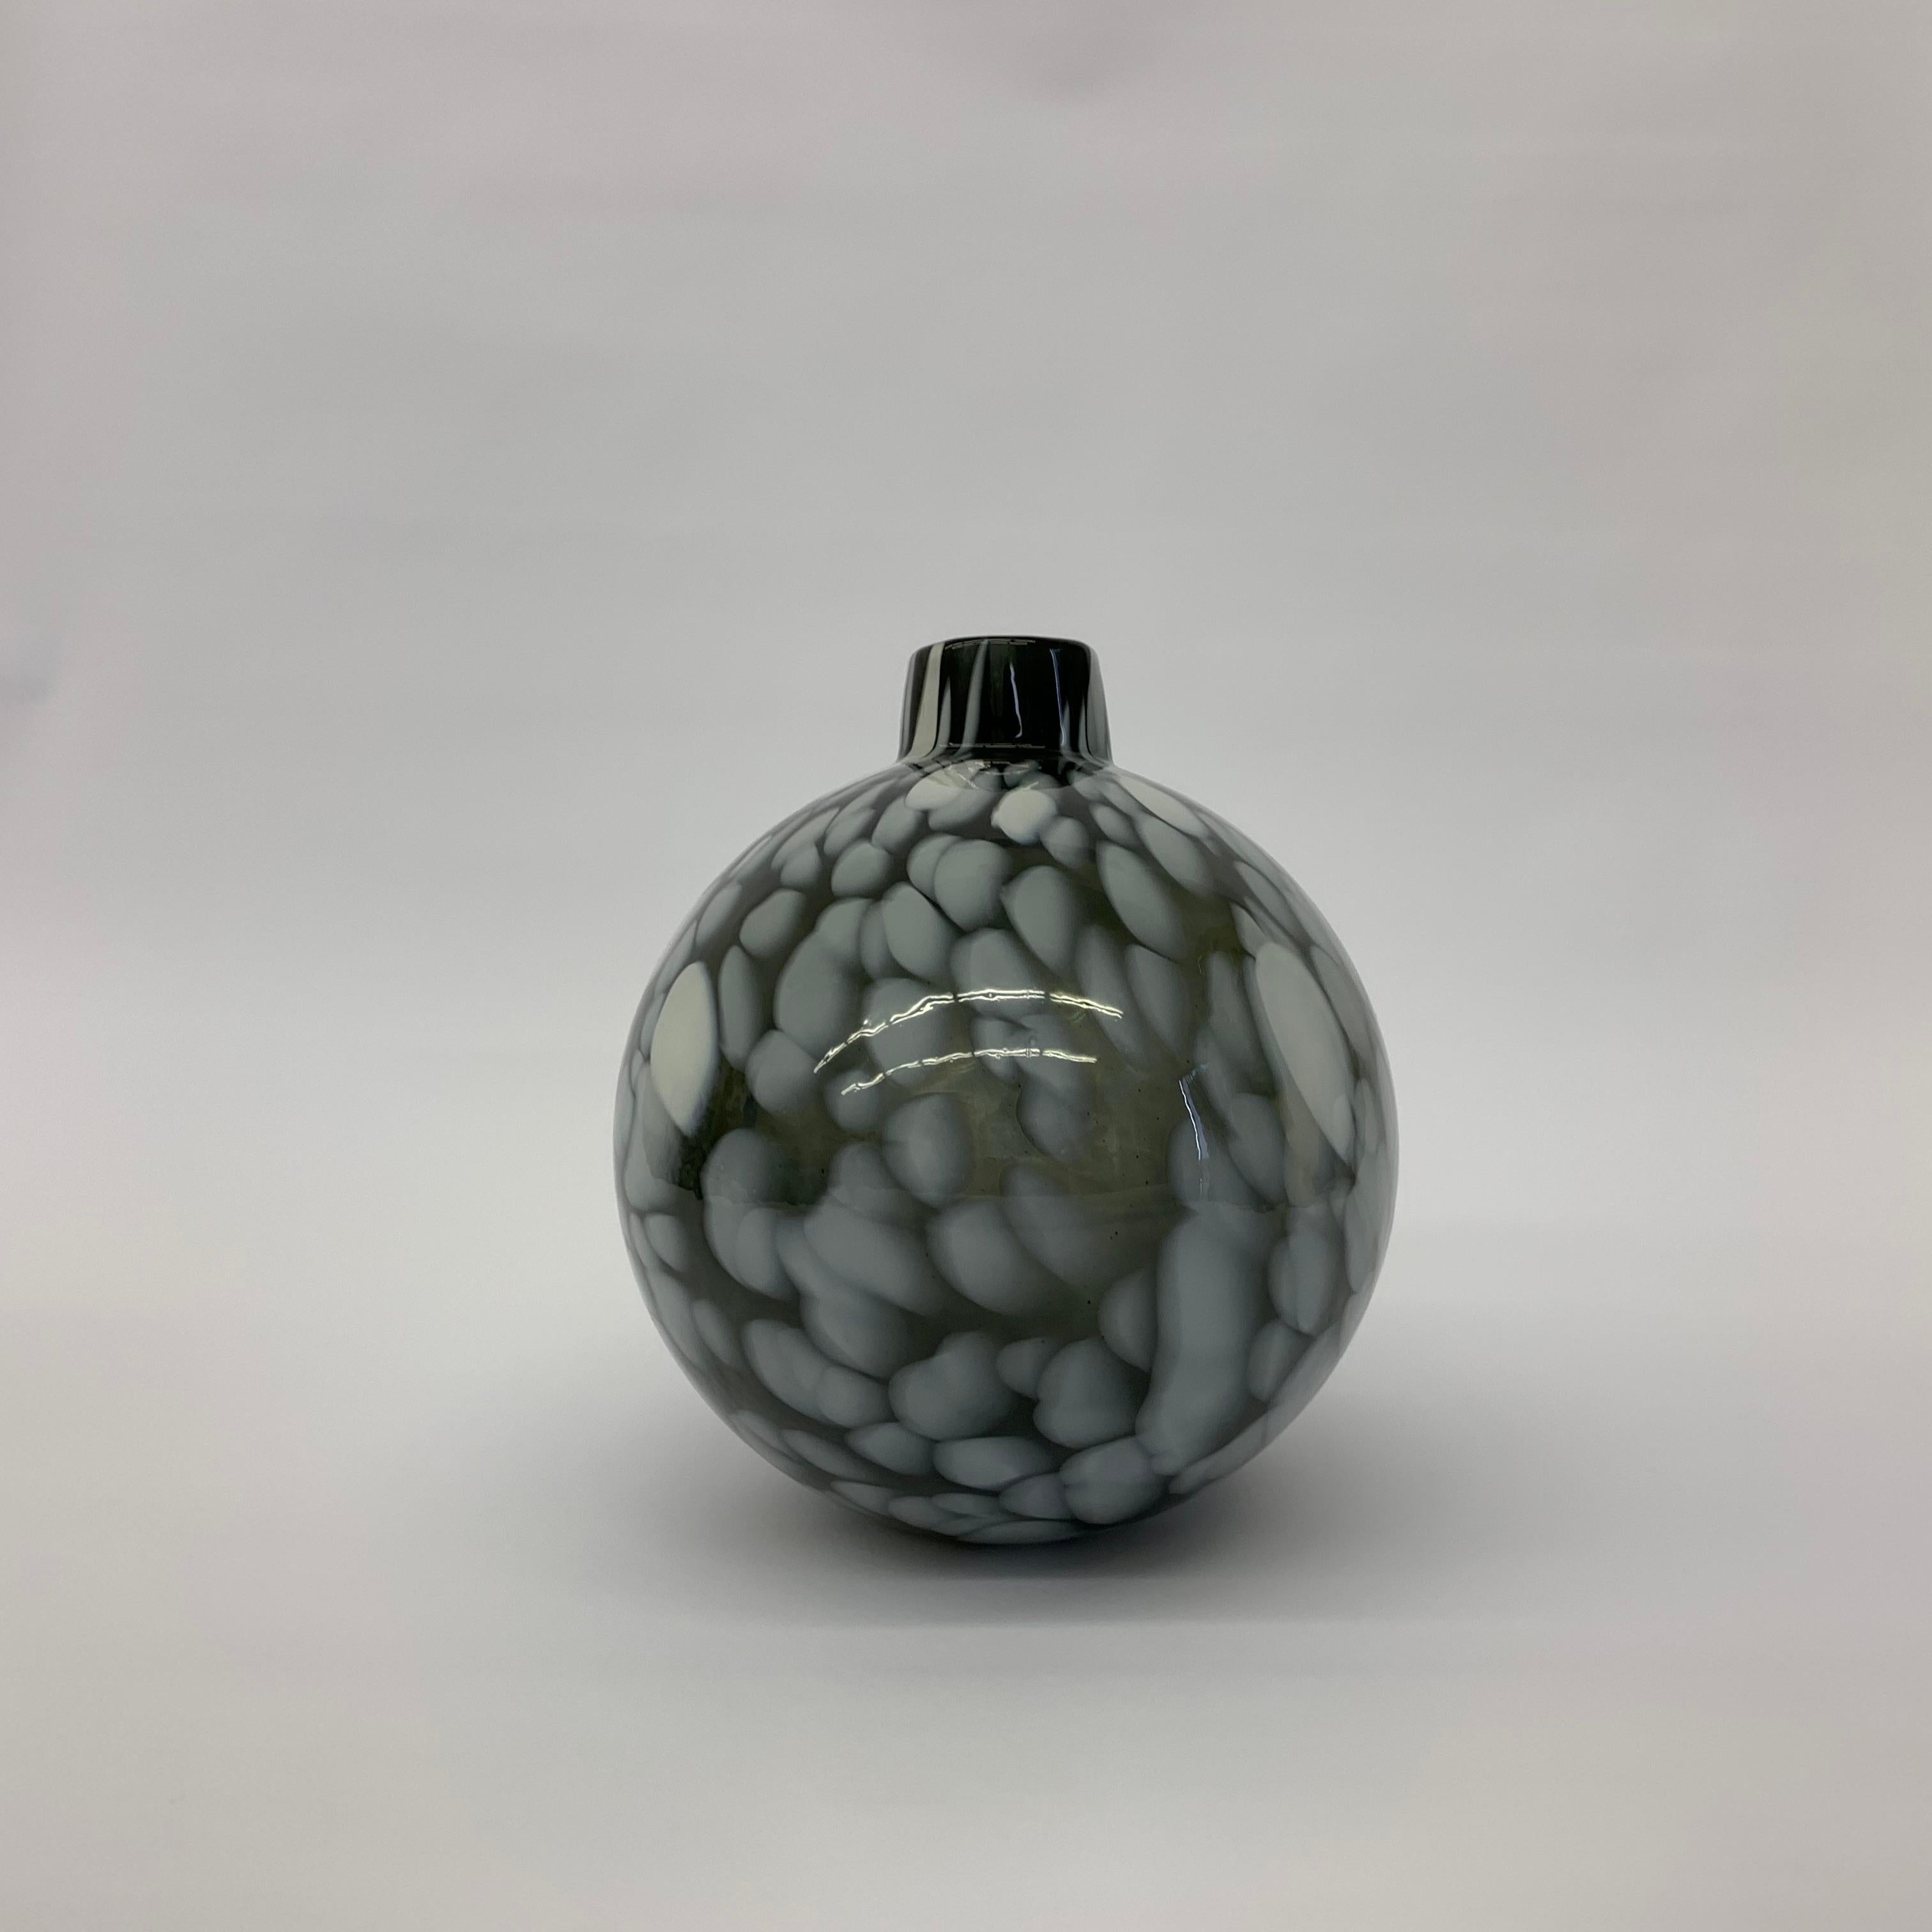 Late 20th Century Nest vase by Ann Wahlstrom for Kosta boda